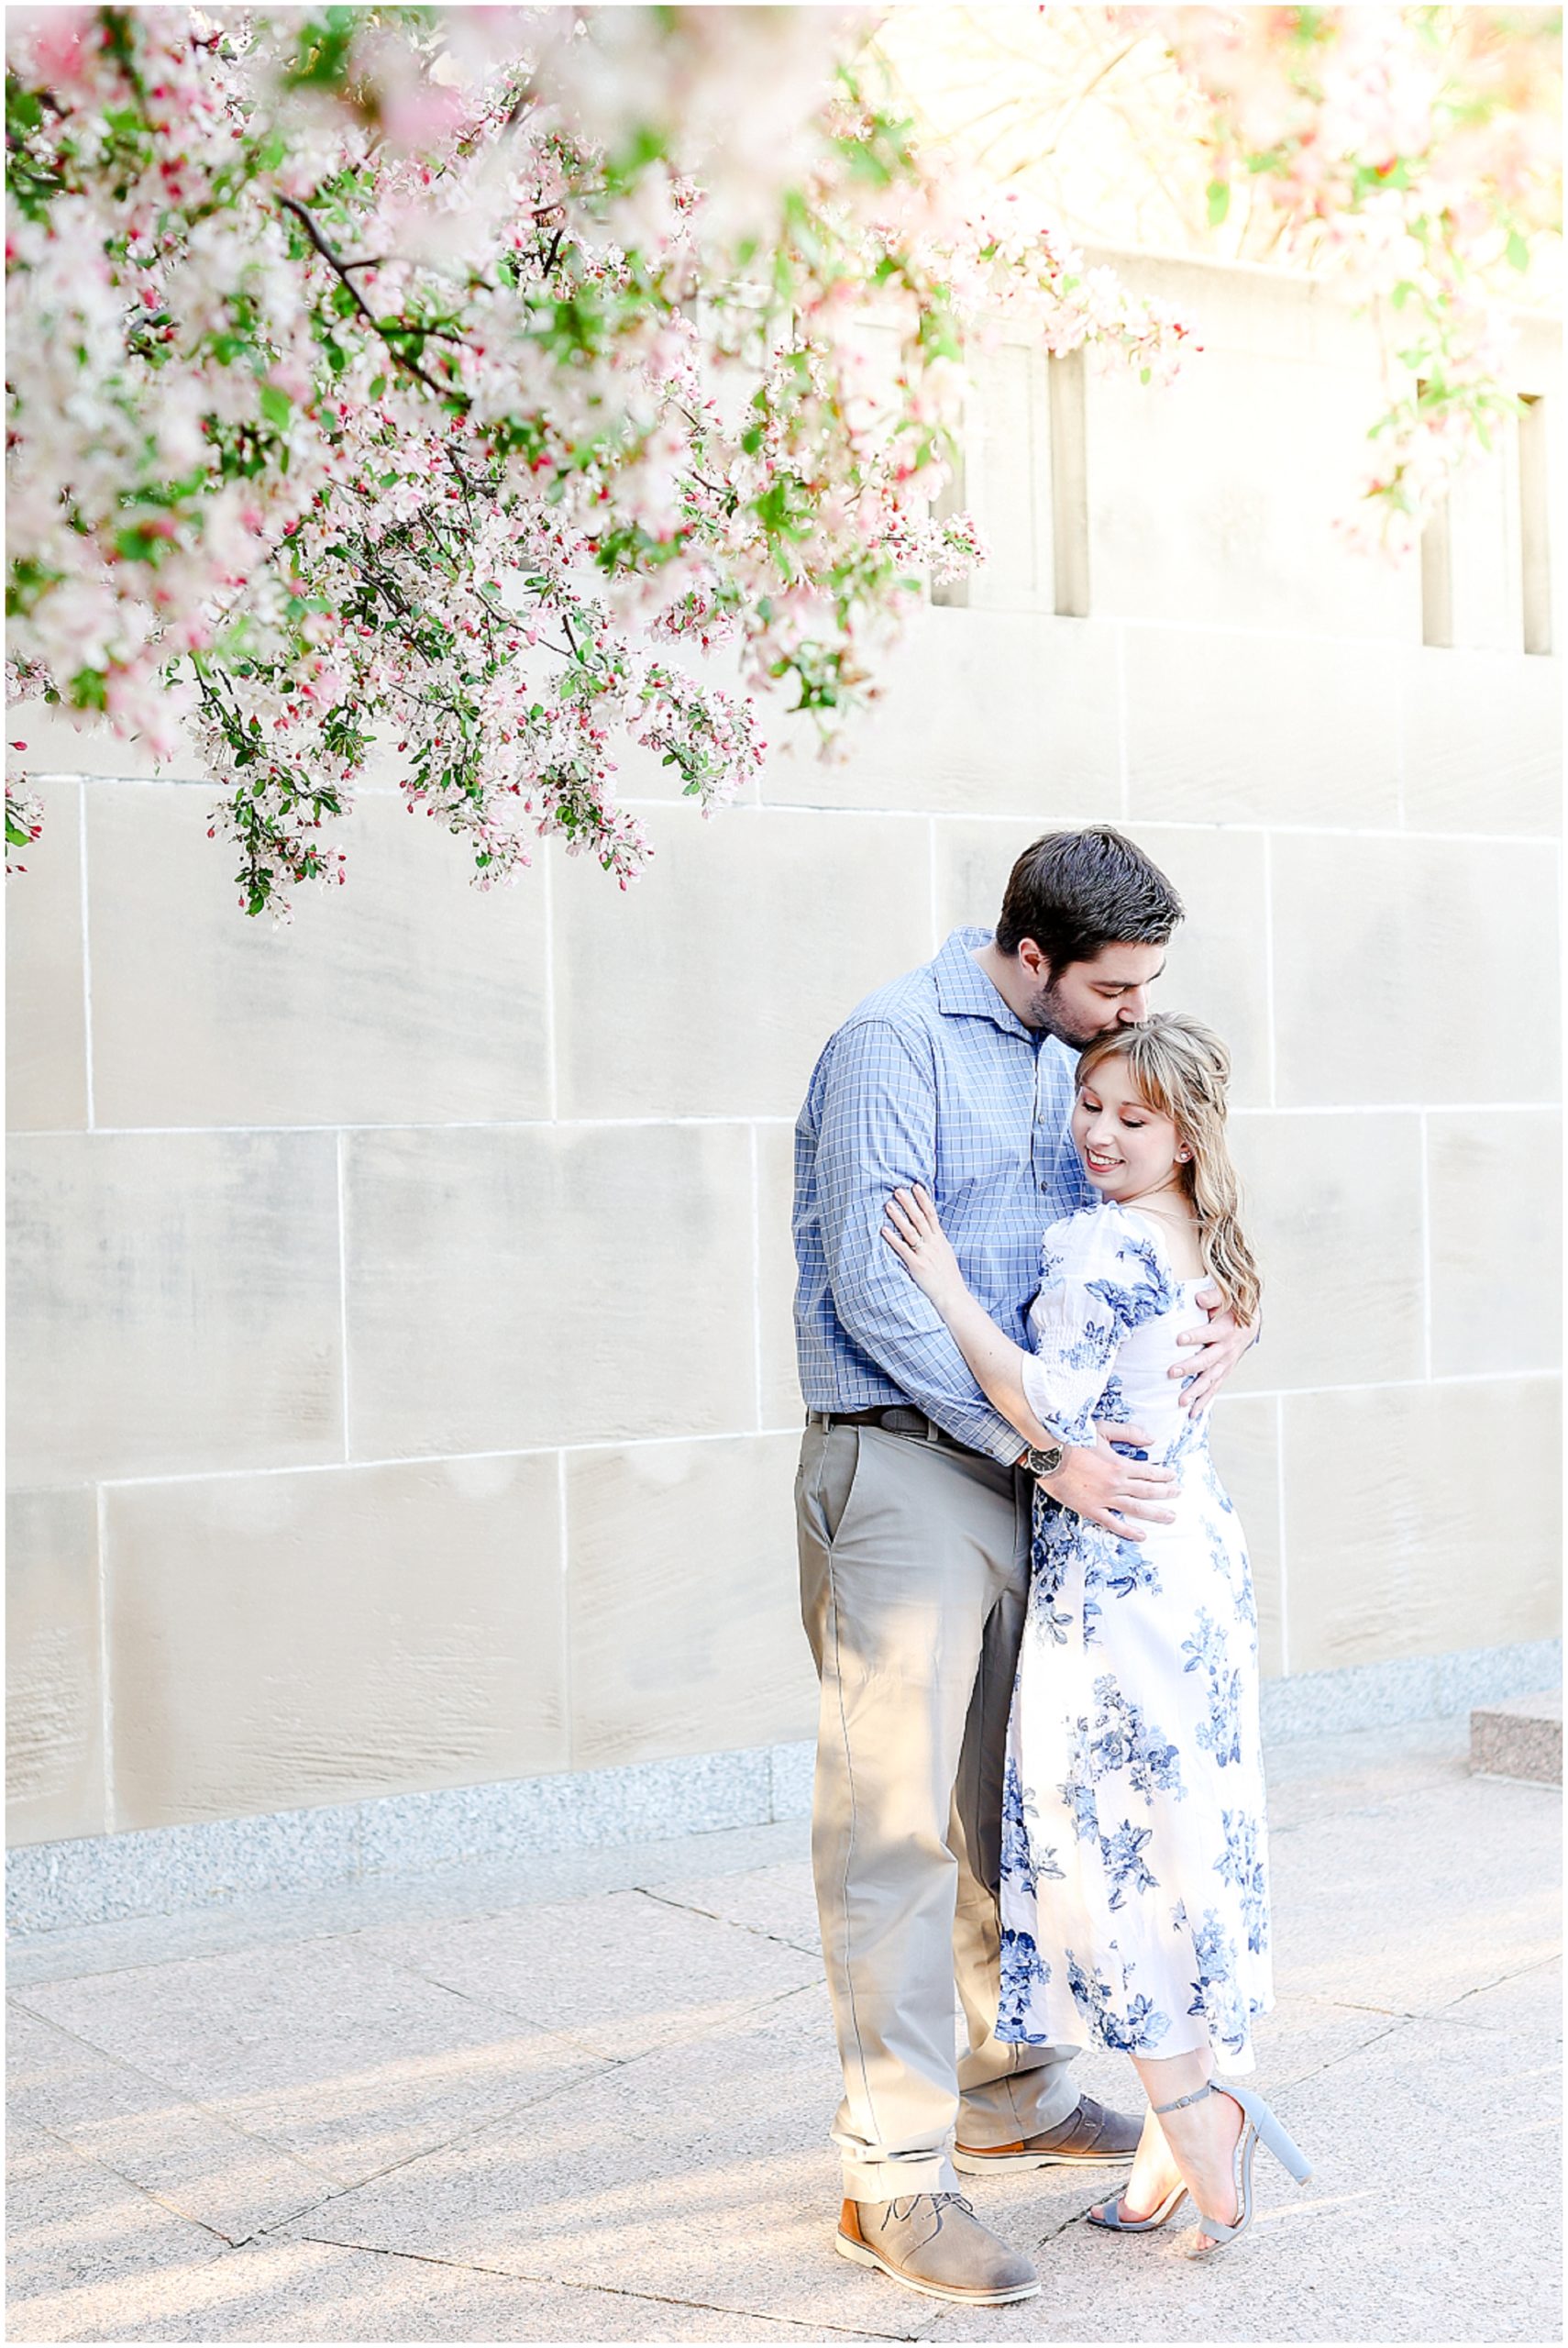 Look at what they wore for their engagement photos! Spring Engagement Photos with Ali & Connor at the Nelson Atkins Museum in Kansas City by best wedding photographer Mariam Saifan Photography - Engagement and Wedding Style Guide - What to Wear and Where to Take Your Photos in Kansas City  - spring flowers 